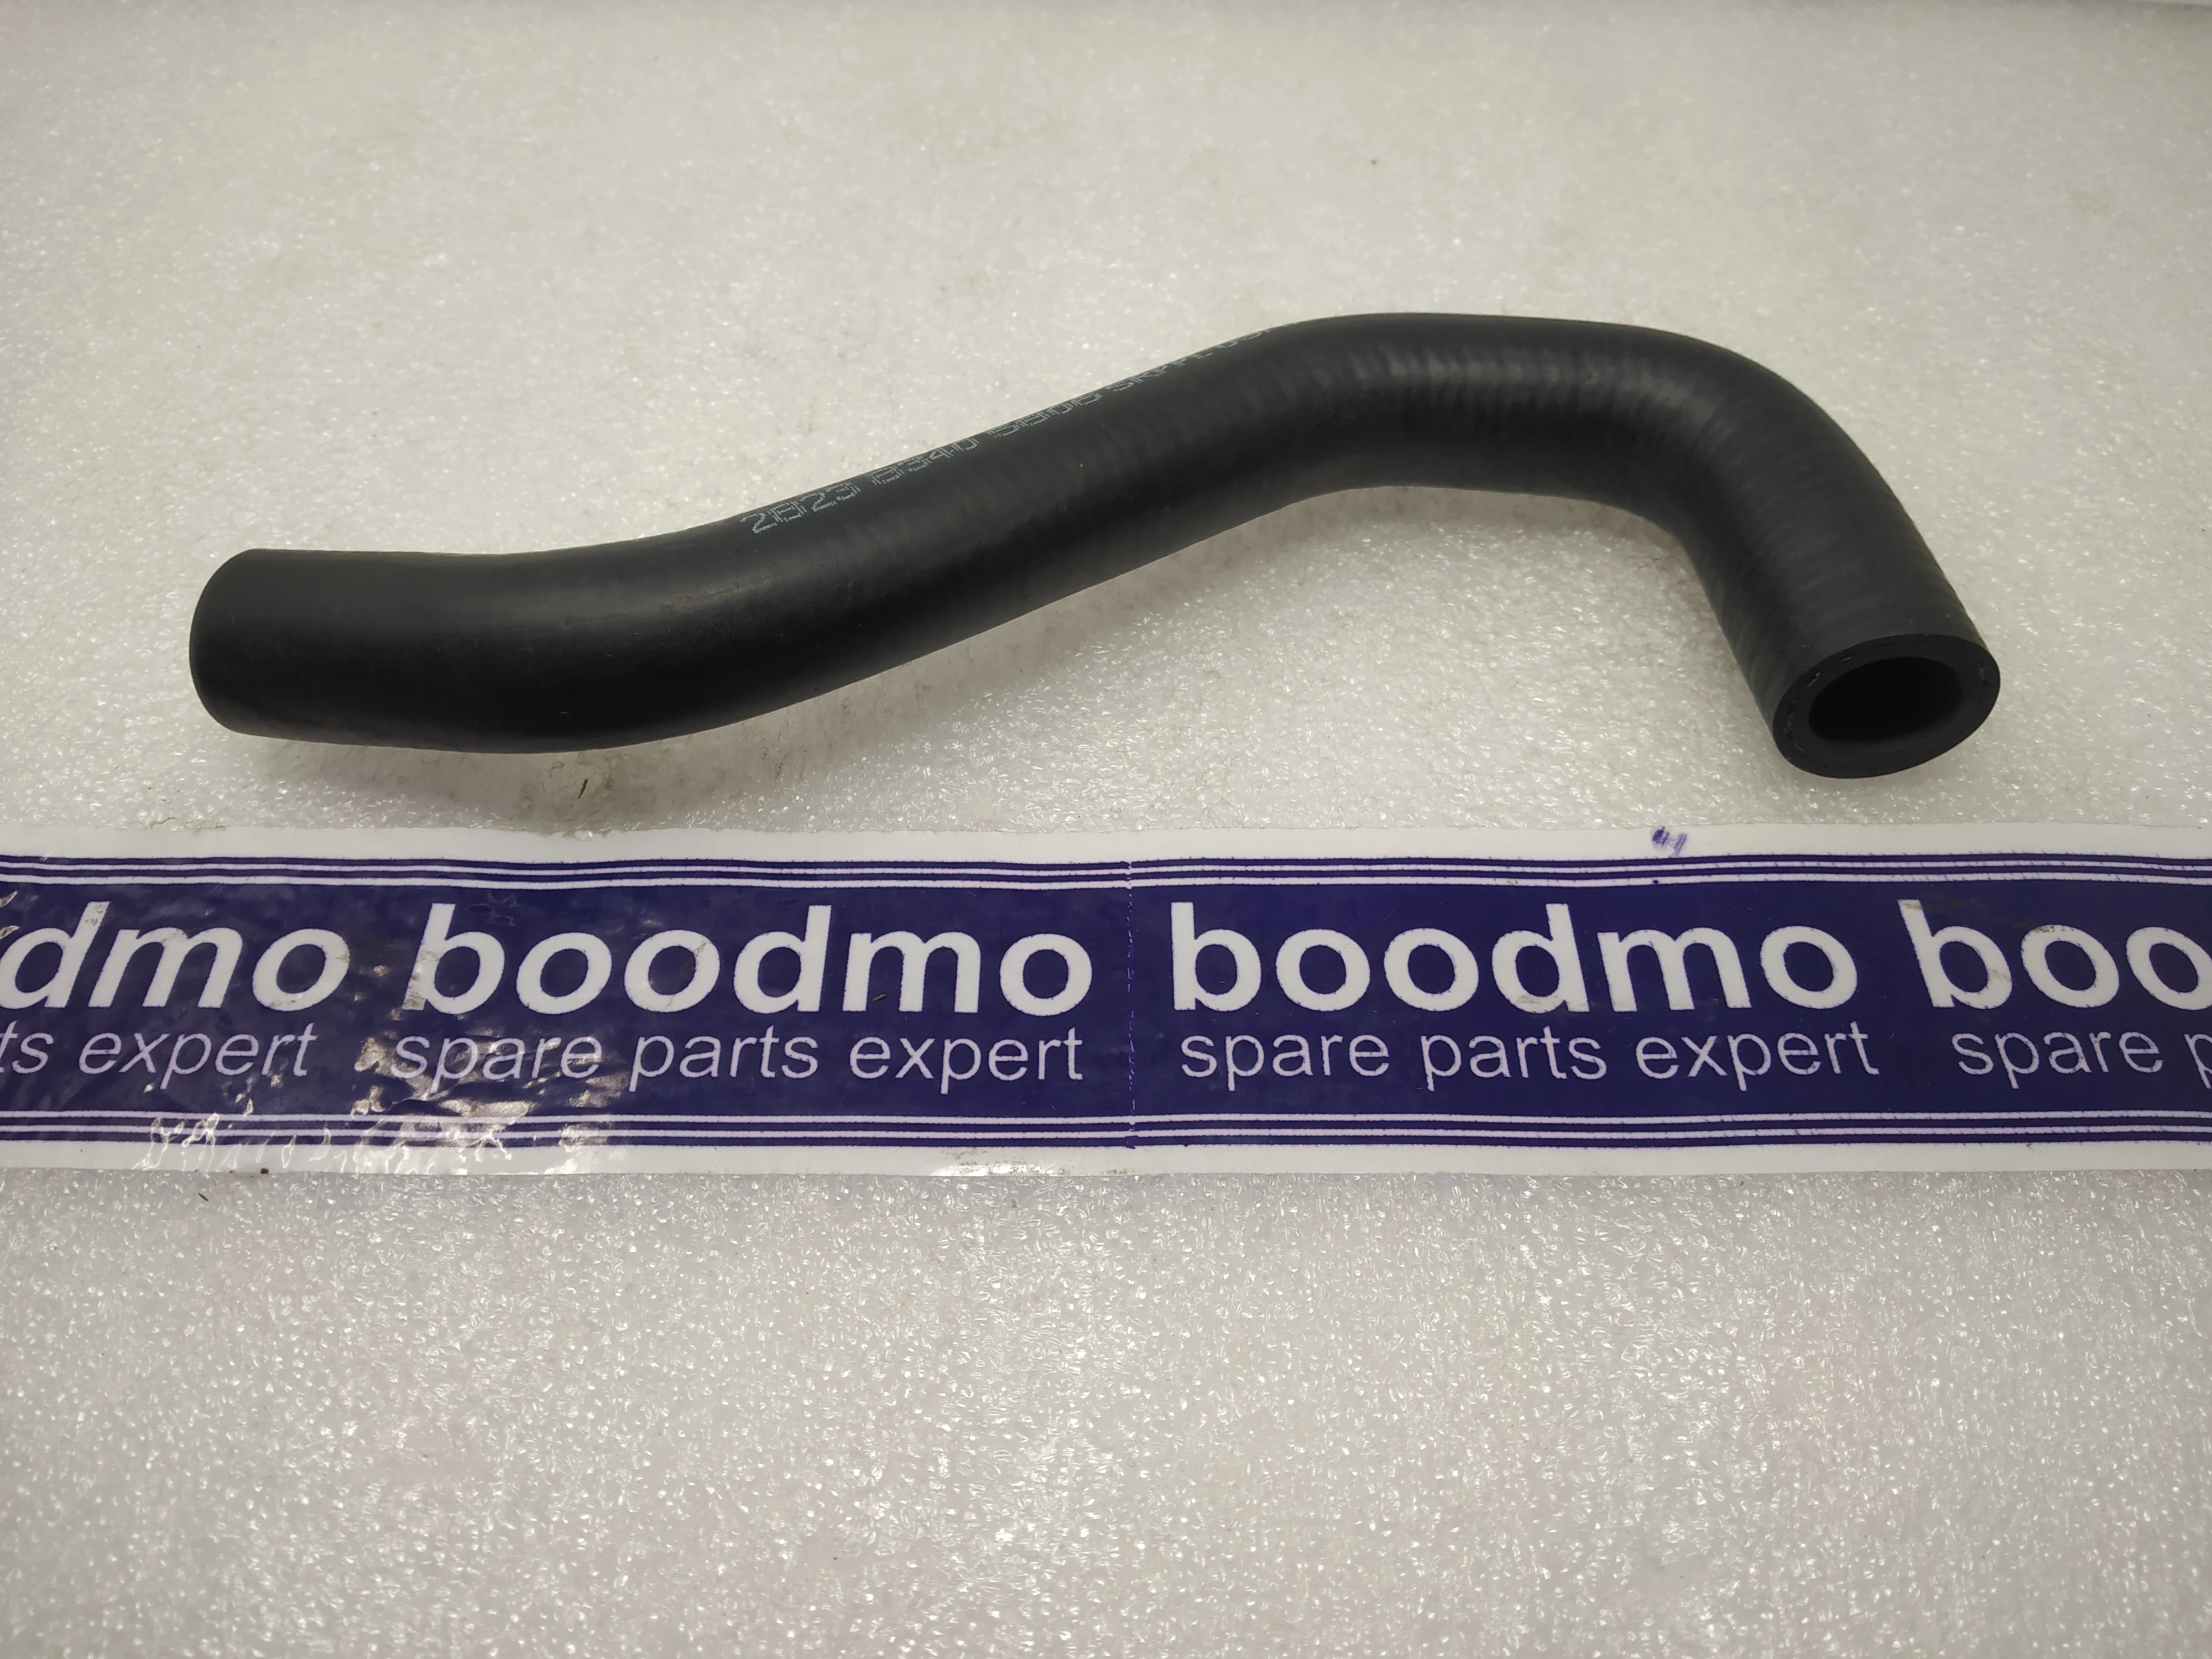 HEATER HOSE (ENGINE TO HVAC): TATA 282305806 -compatibility, features,  prices. boodmo